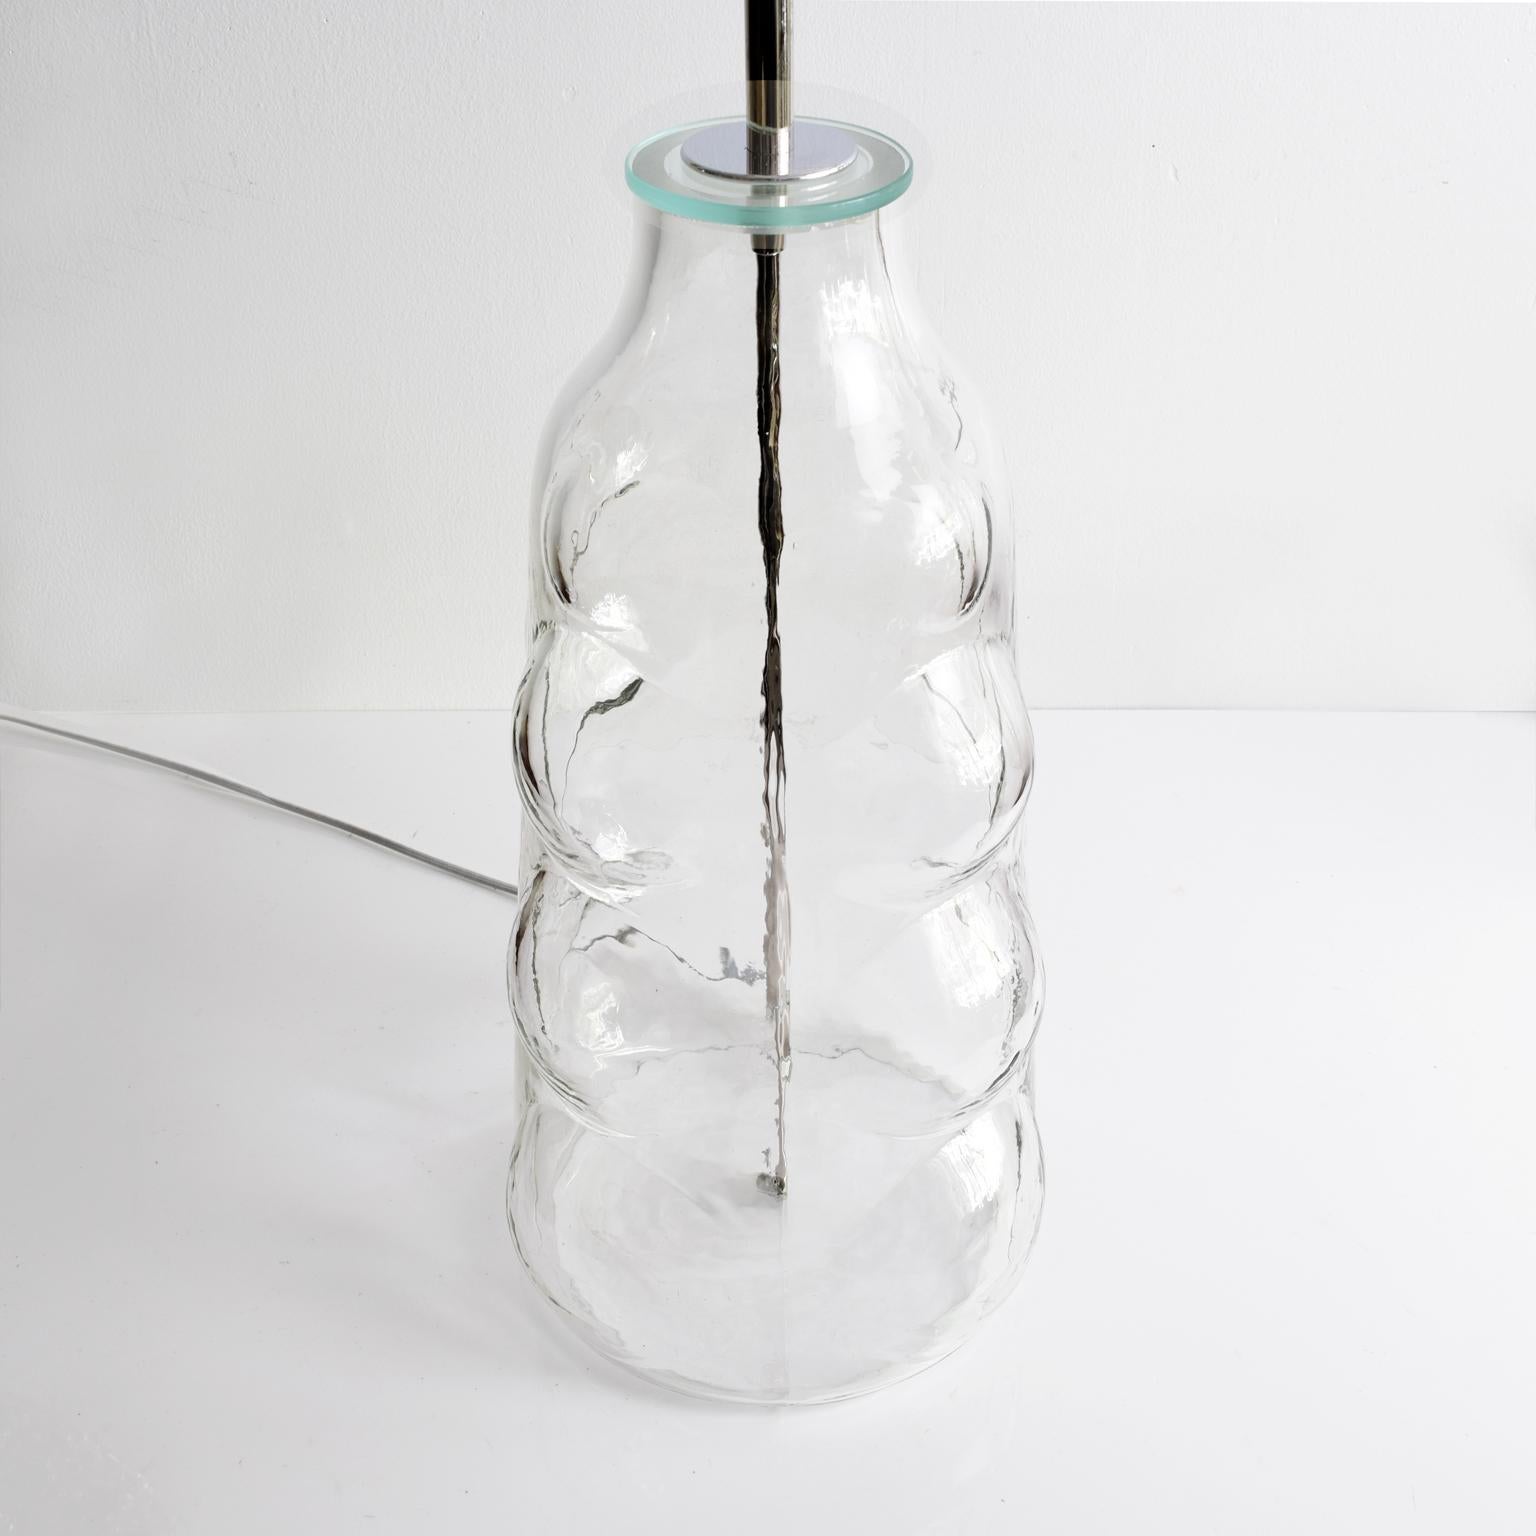 20th Century Large Scale Scandinavian Modern Clear Glass Lamp by Flygsfors, Sweden